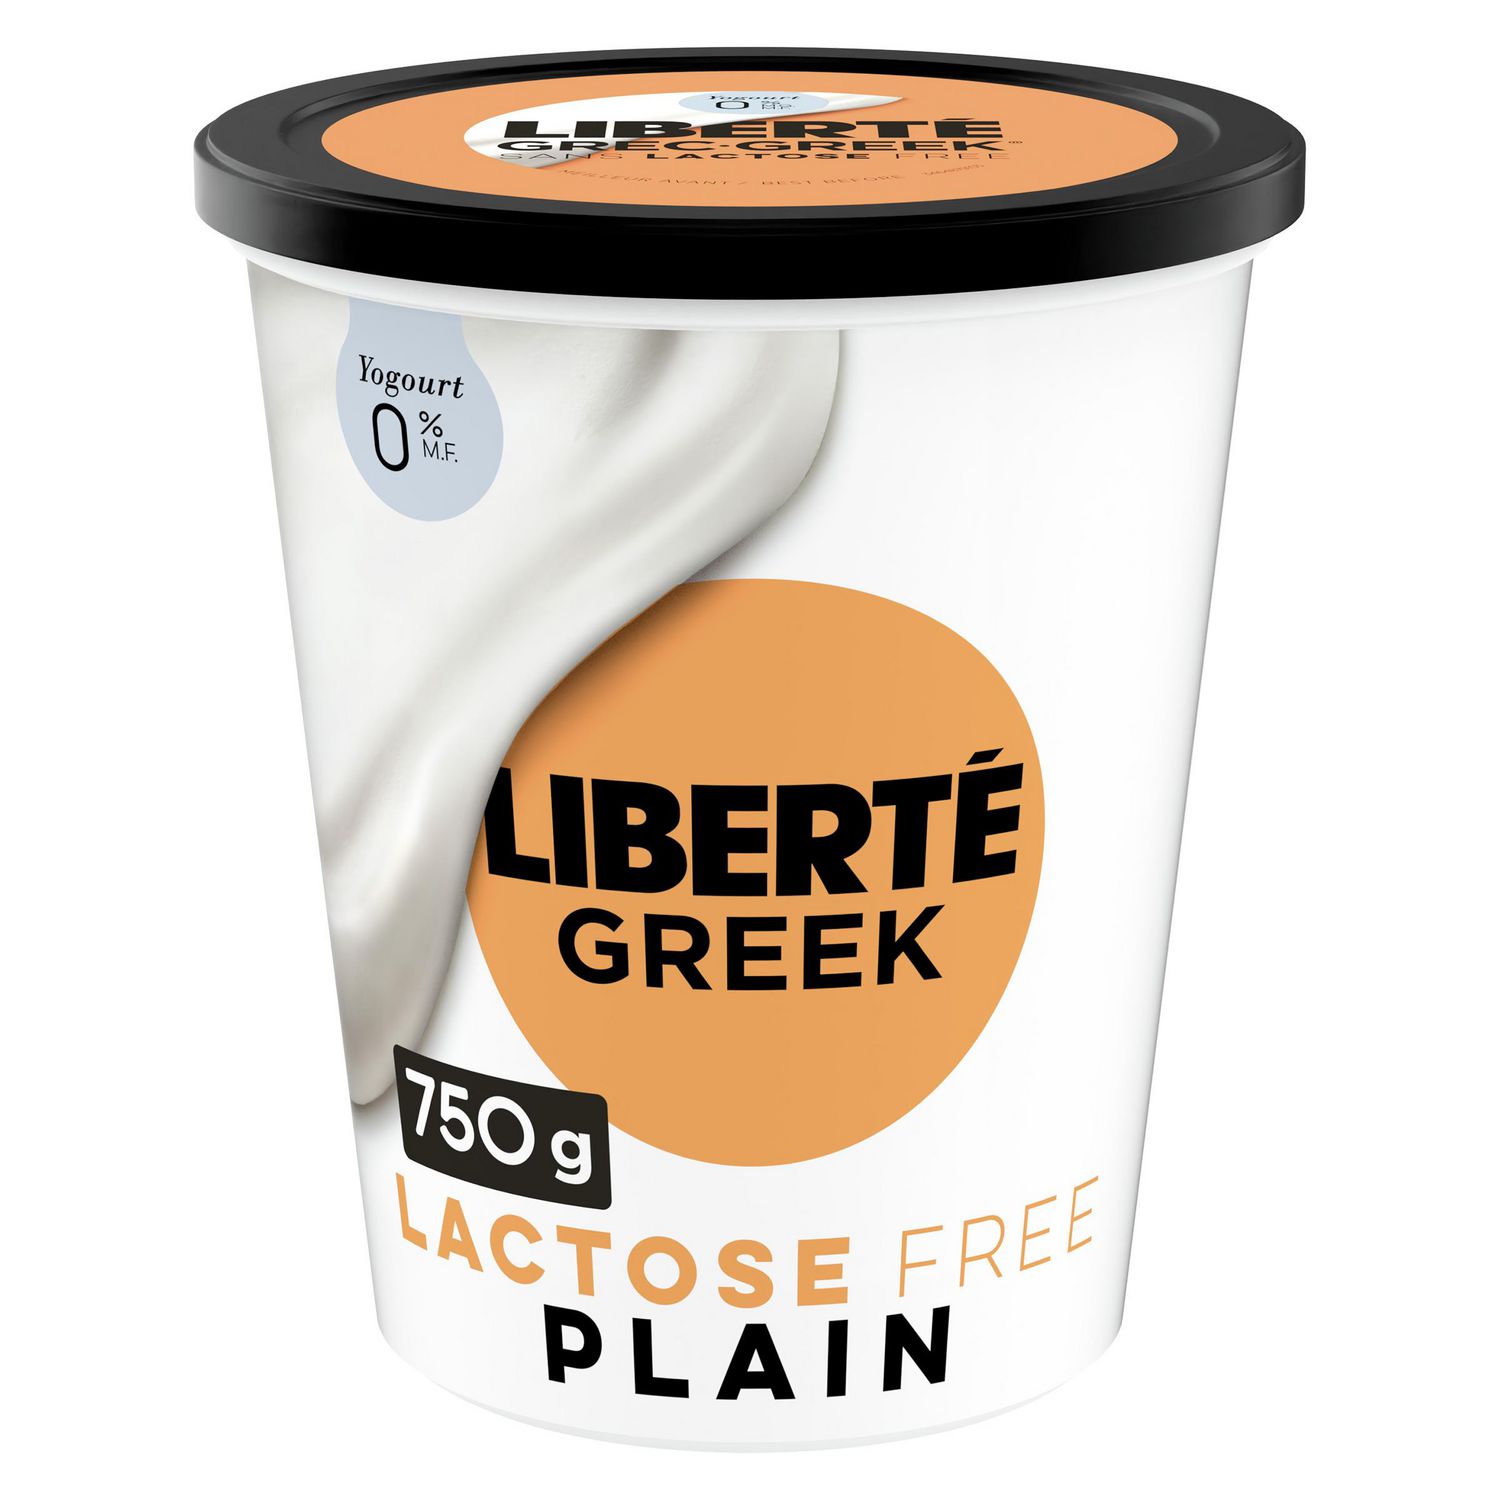 What are the top rated brands for lactose-free Greek yogurt?